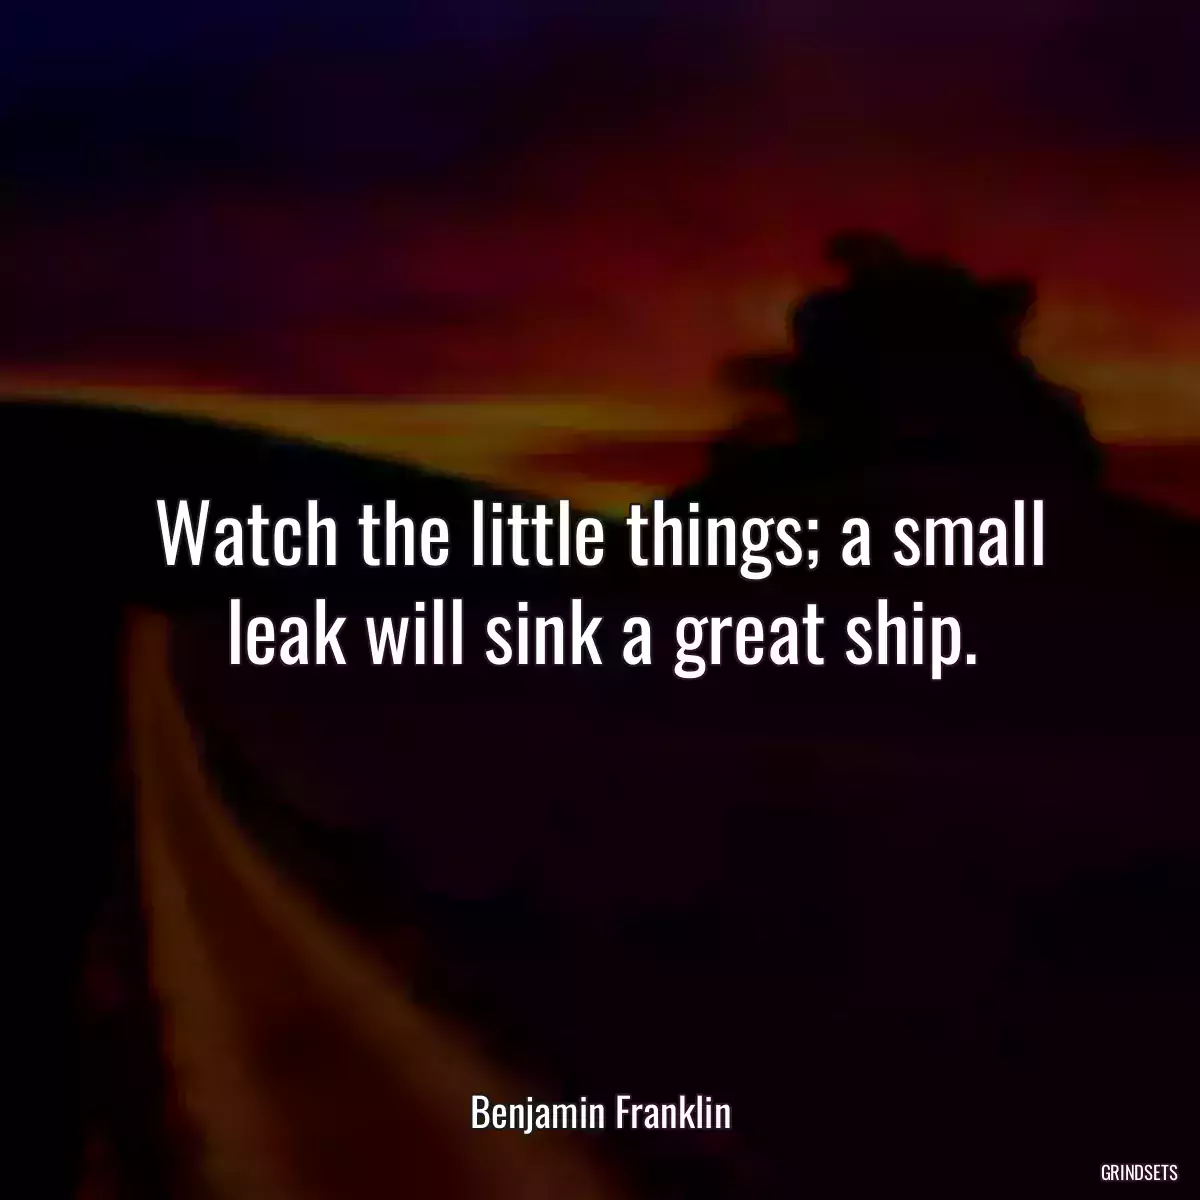 Watch the little things; a small leak will sink a great ship.